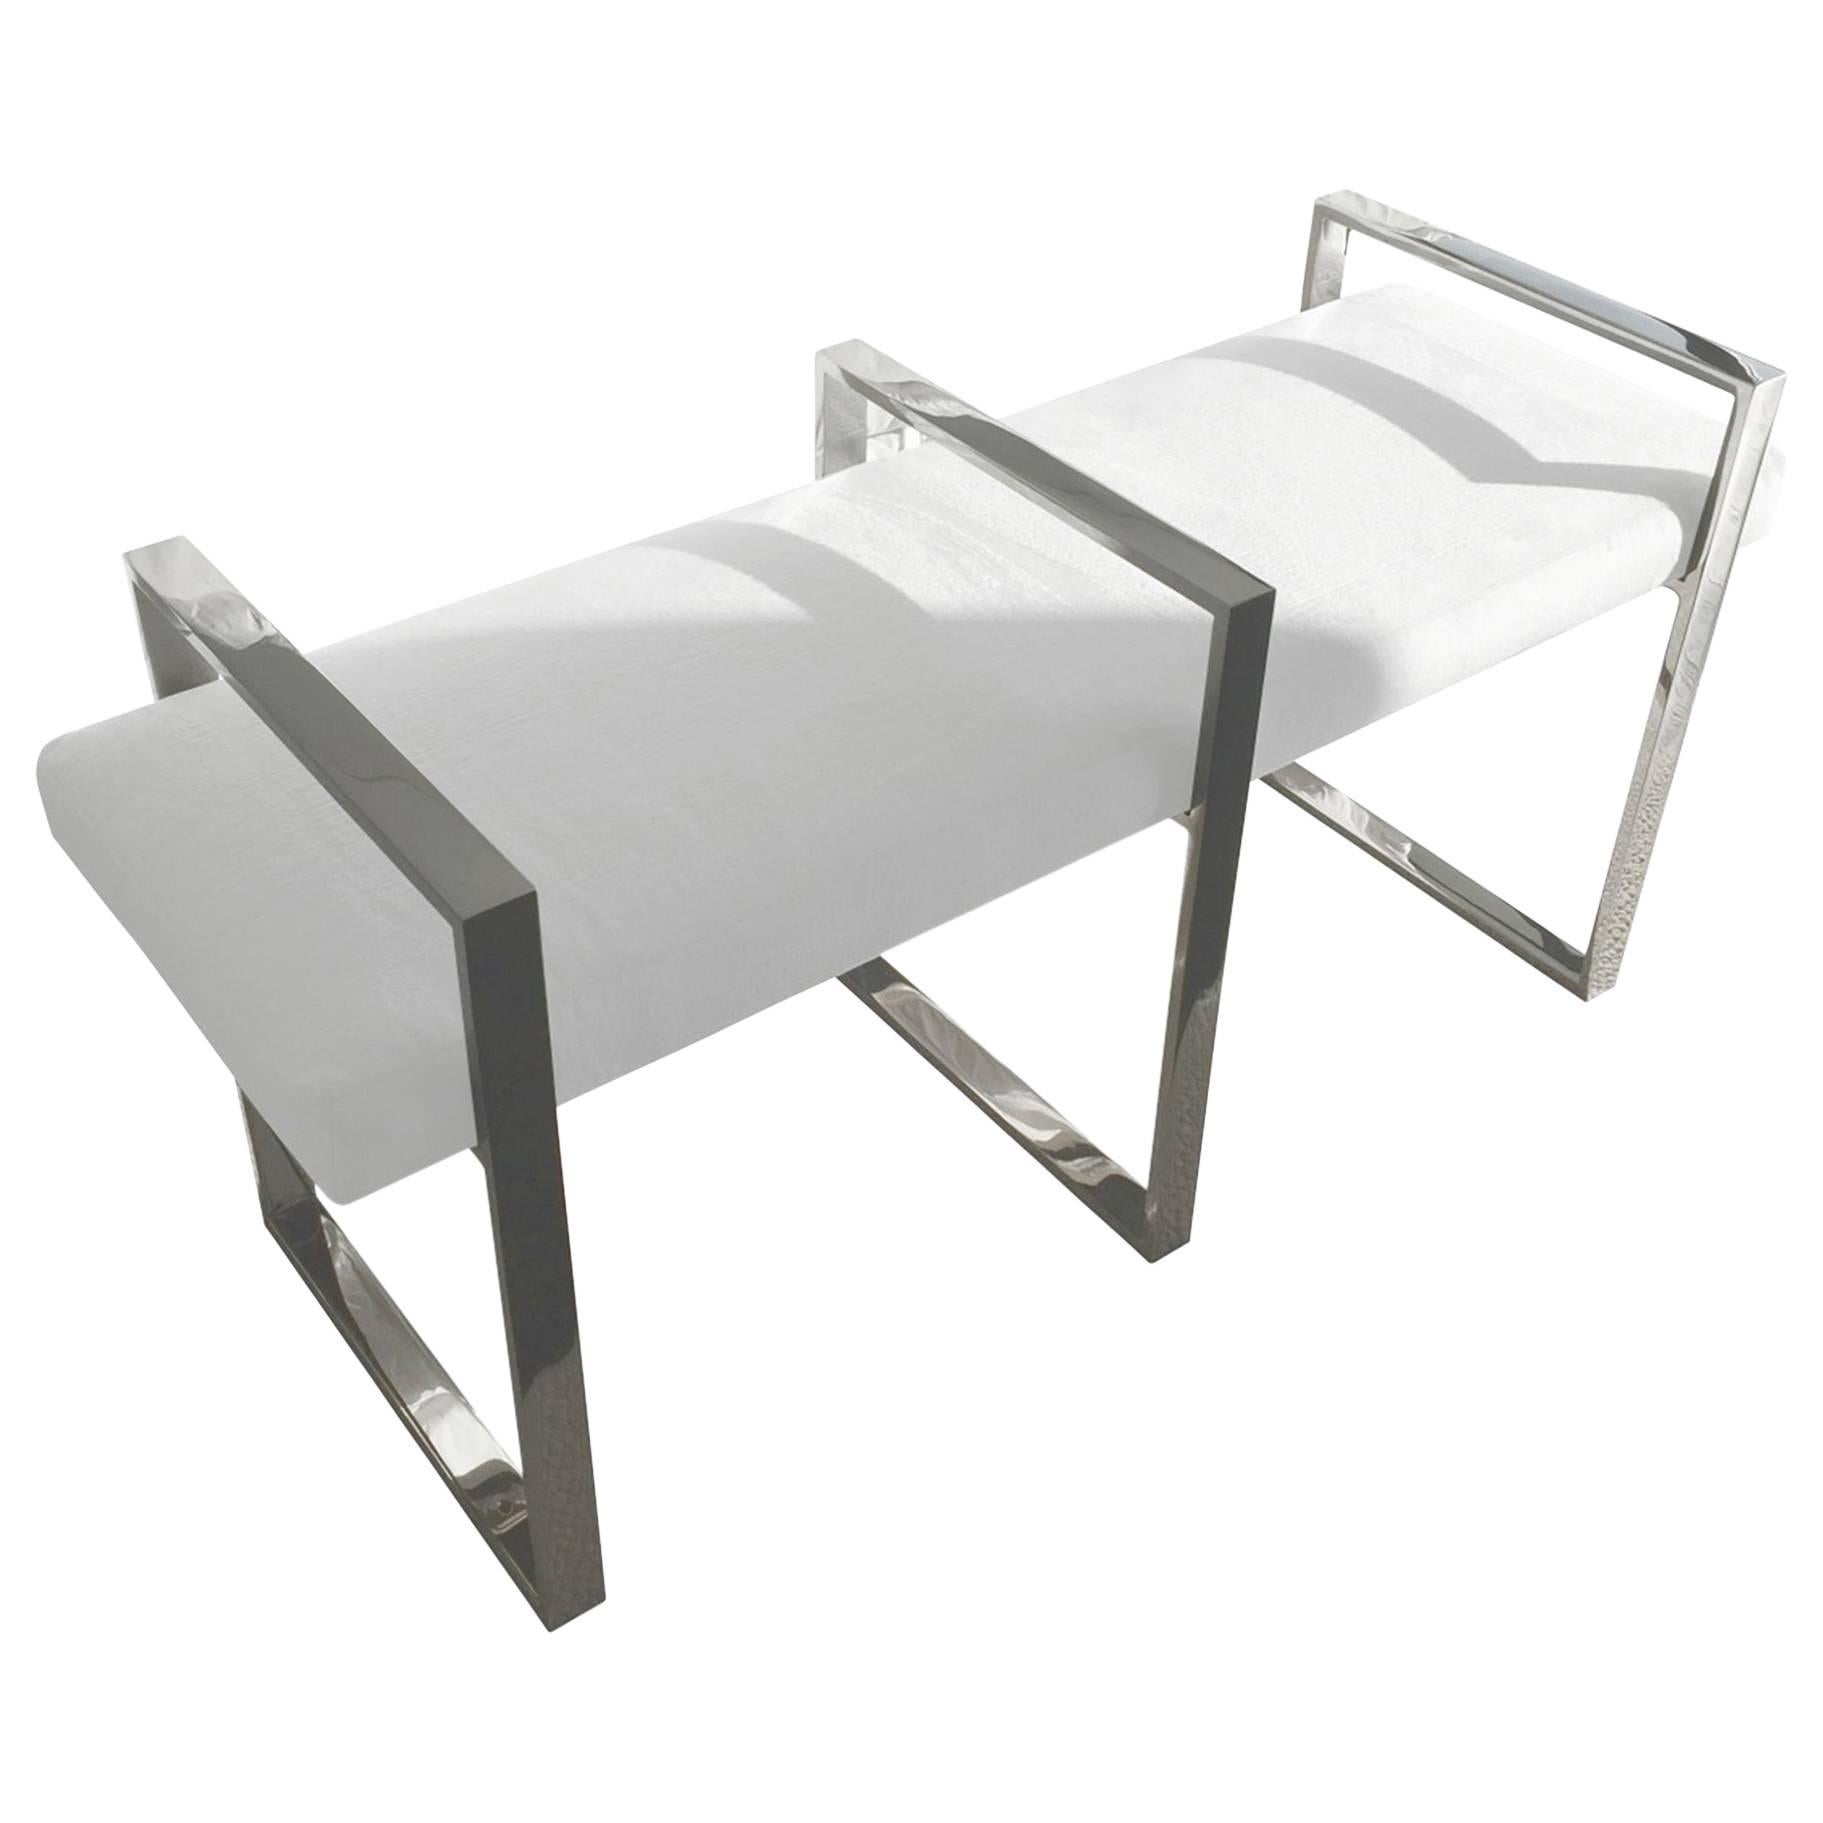 Triple Rectangle Bench in Stainless Steel by Cain Modern